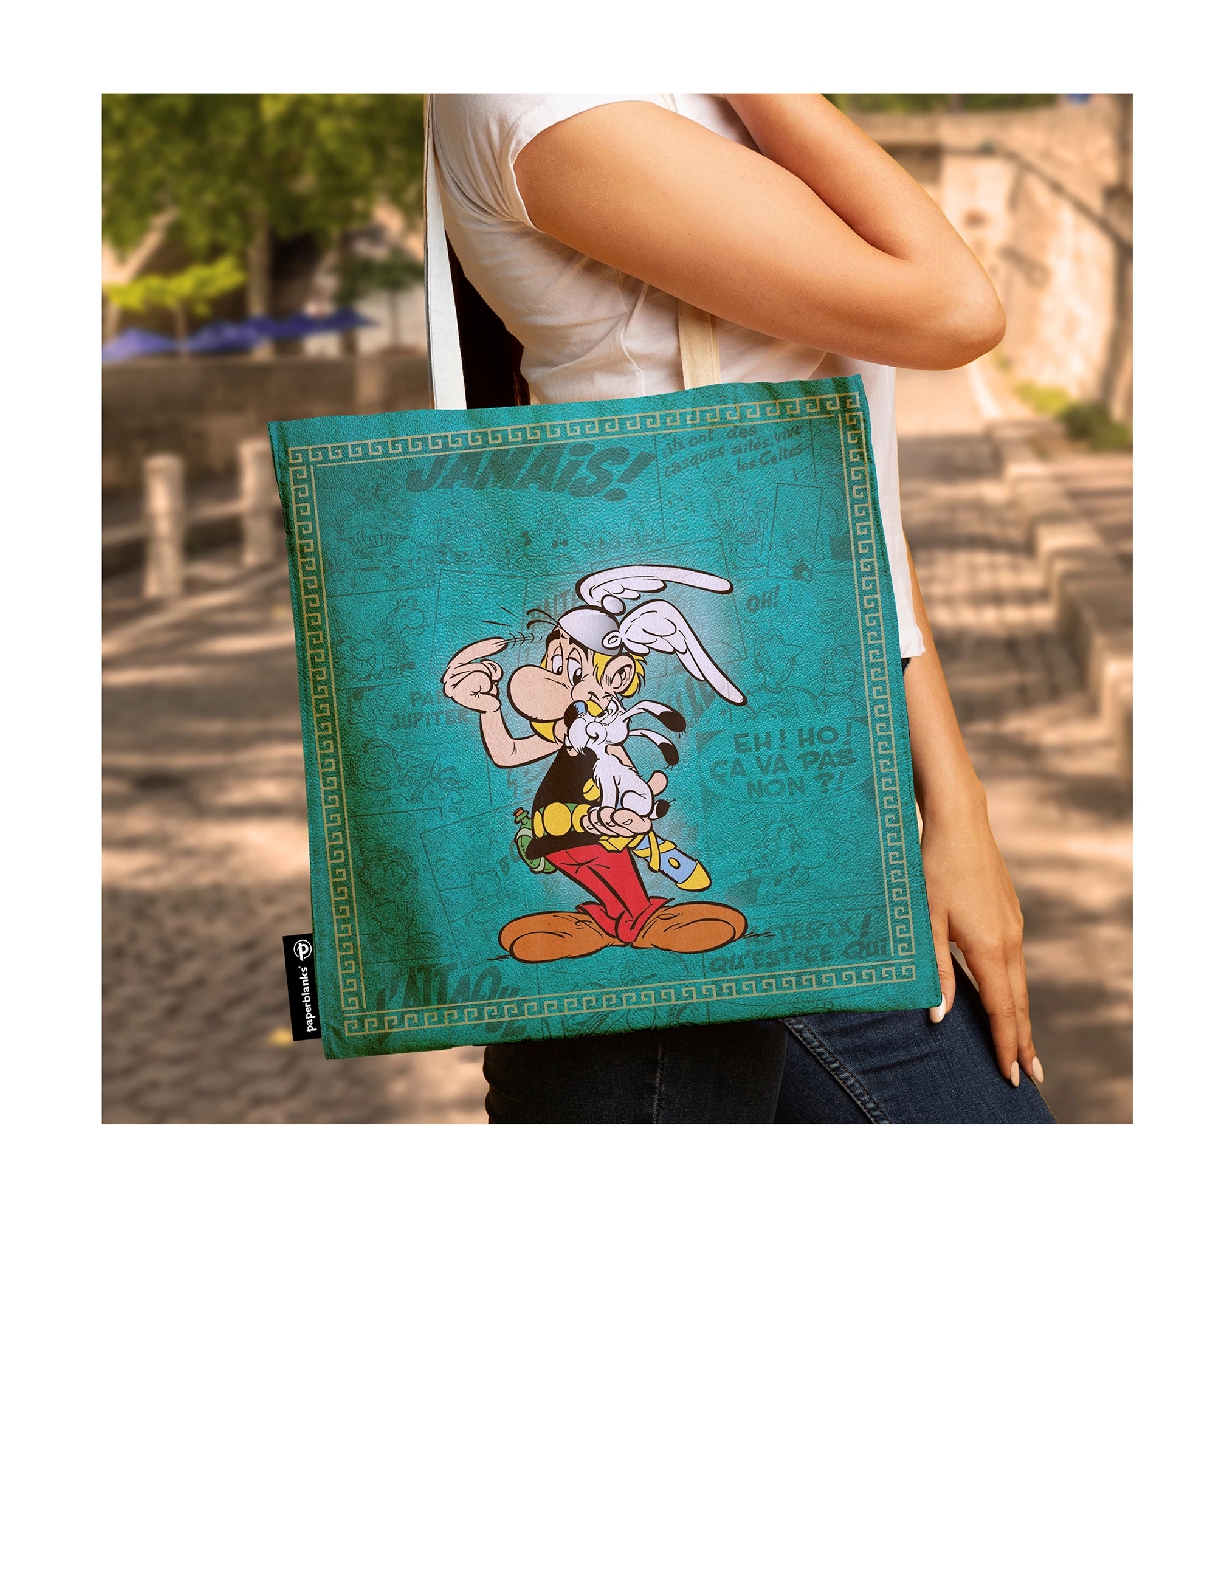 Asterix the Gaul, The Adventures of Asterix, Canvas Bags, Canvas Bag